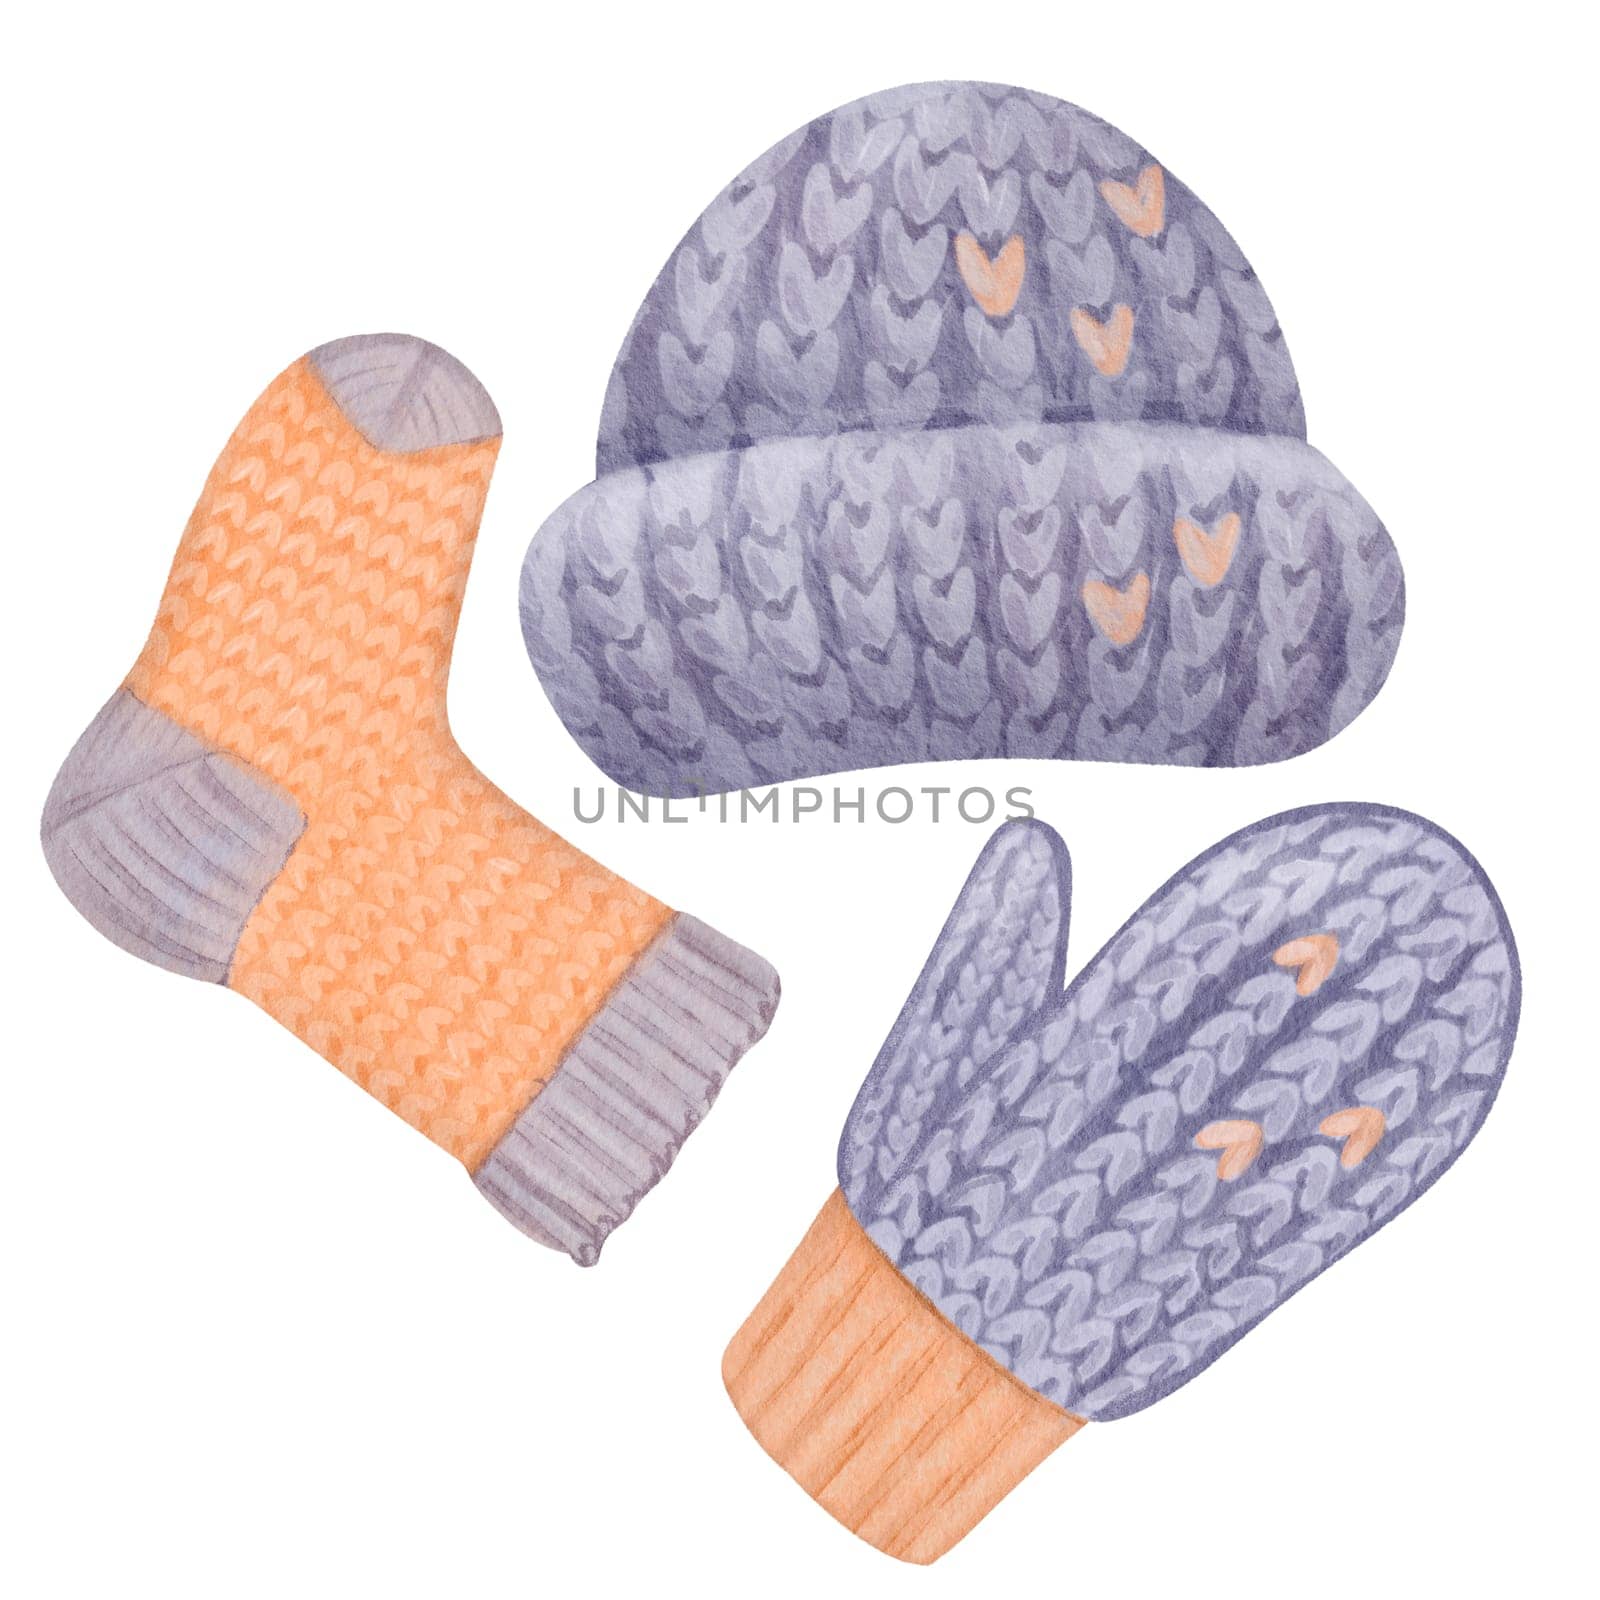 A collection of knitted winter wear. Includes a cozy winter hat, snug knitted sock, and soft mitten. Rendered in shades of purple and orange. Knitting set. Watercolor isolated elements by Art_Mari_Ka